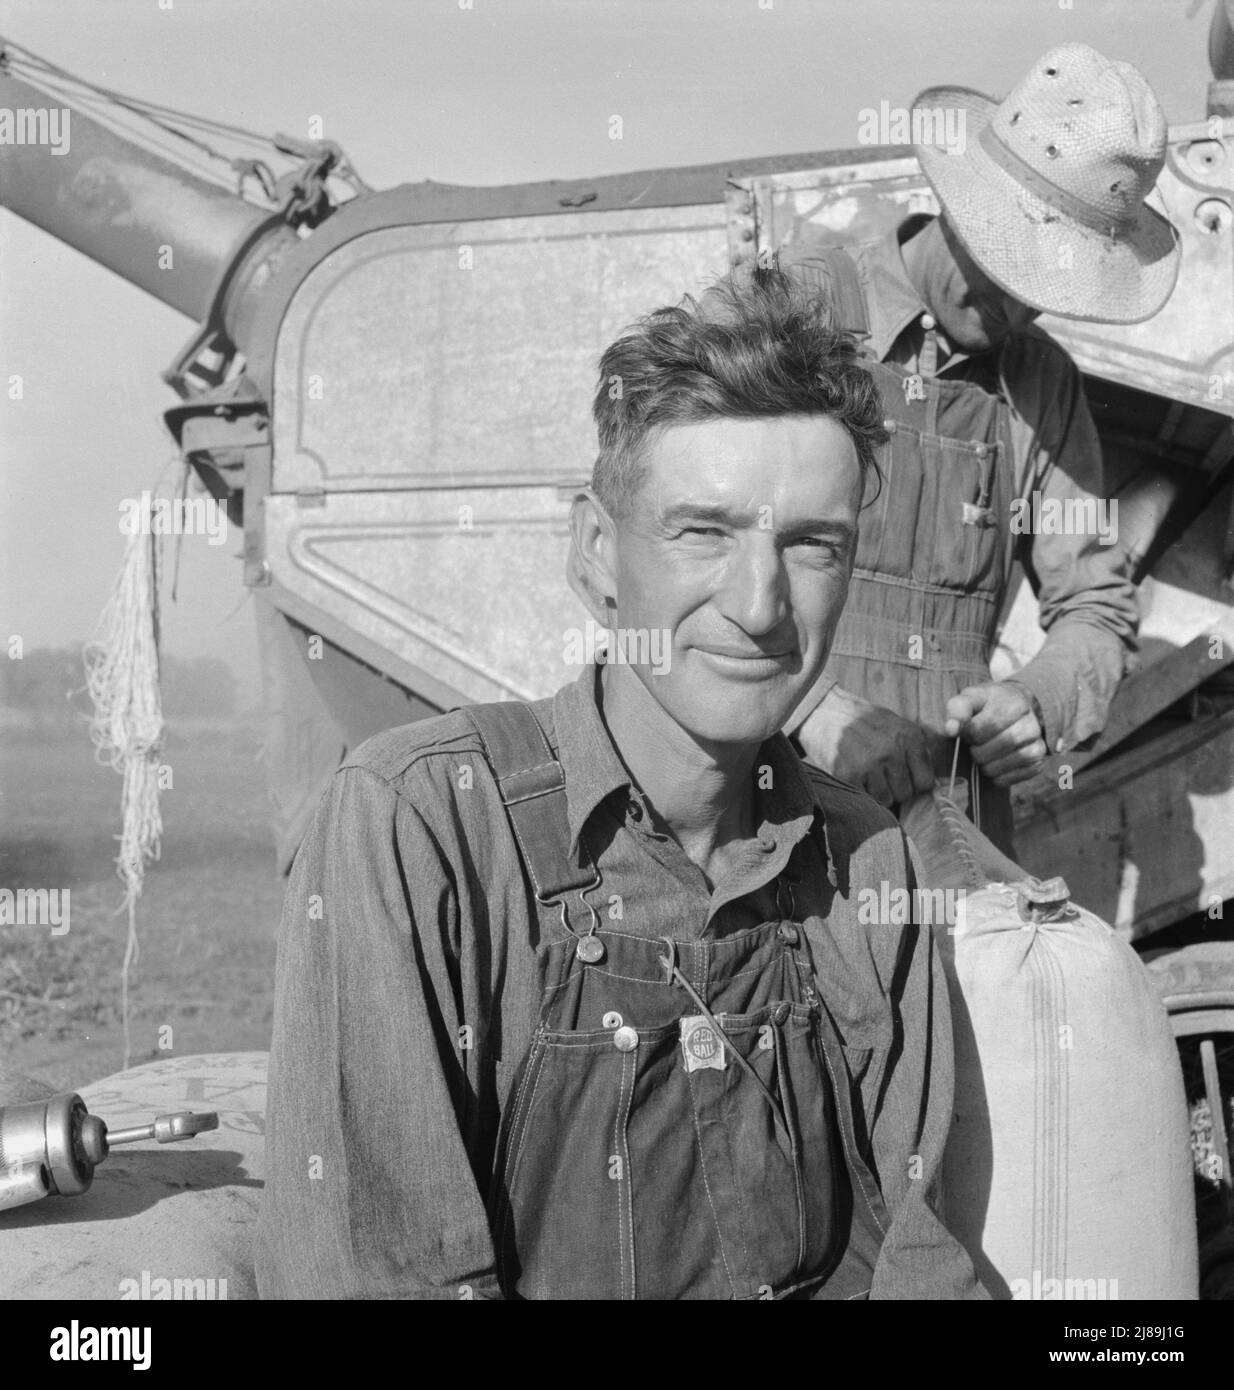 Oklahoman, worked three years as farm laborer, starts next year on his own place. Quit school after third day. Can neither read nor write. Is &quot;best farm laborer&quot; this farmer ever had. Near Ontario, Malheur County, Oregon. Stock Photo